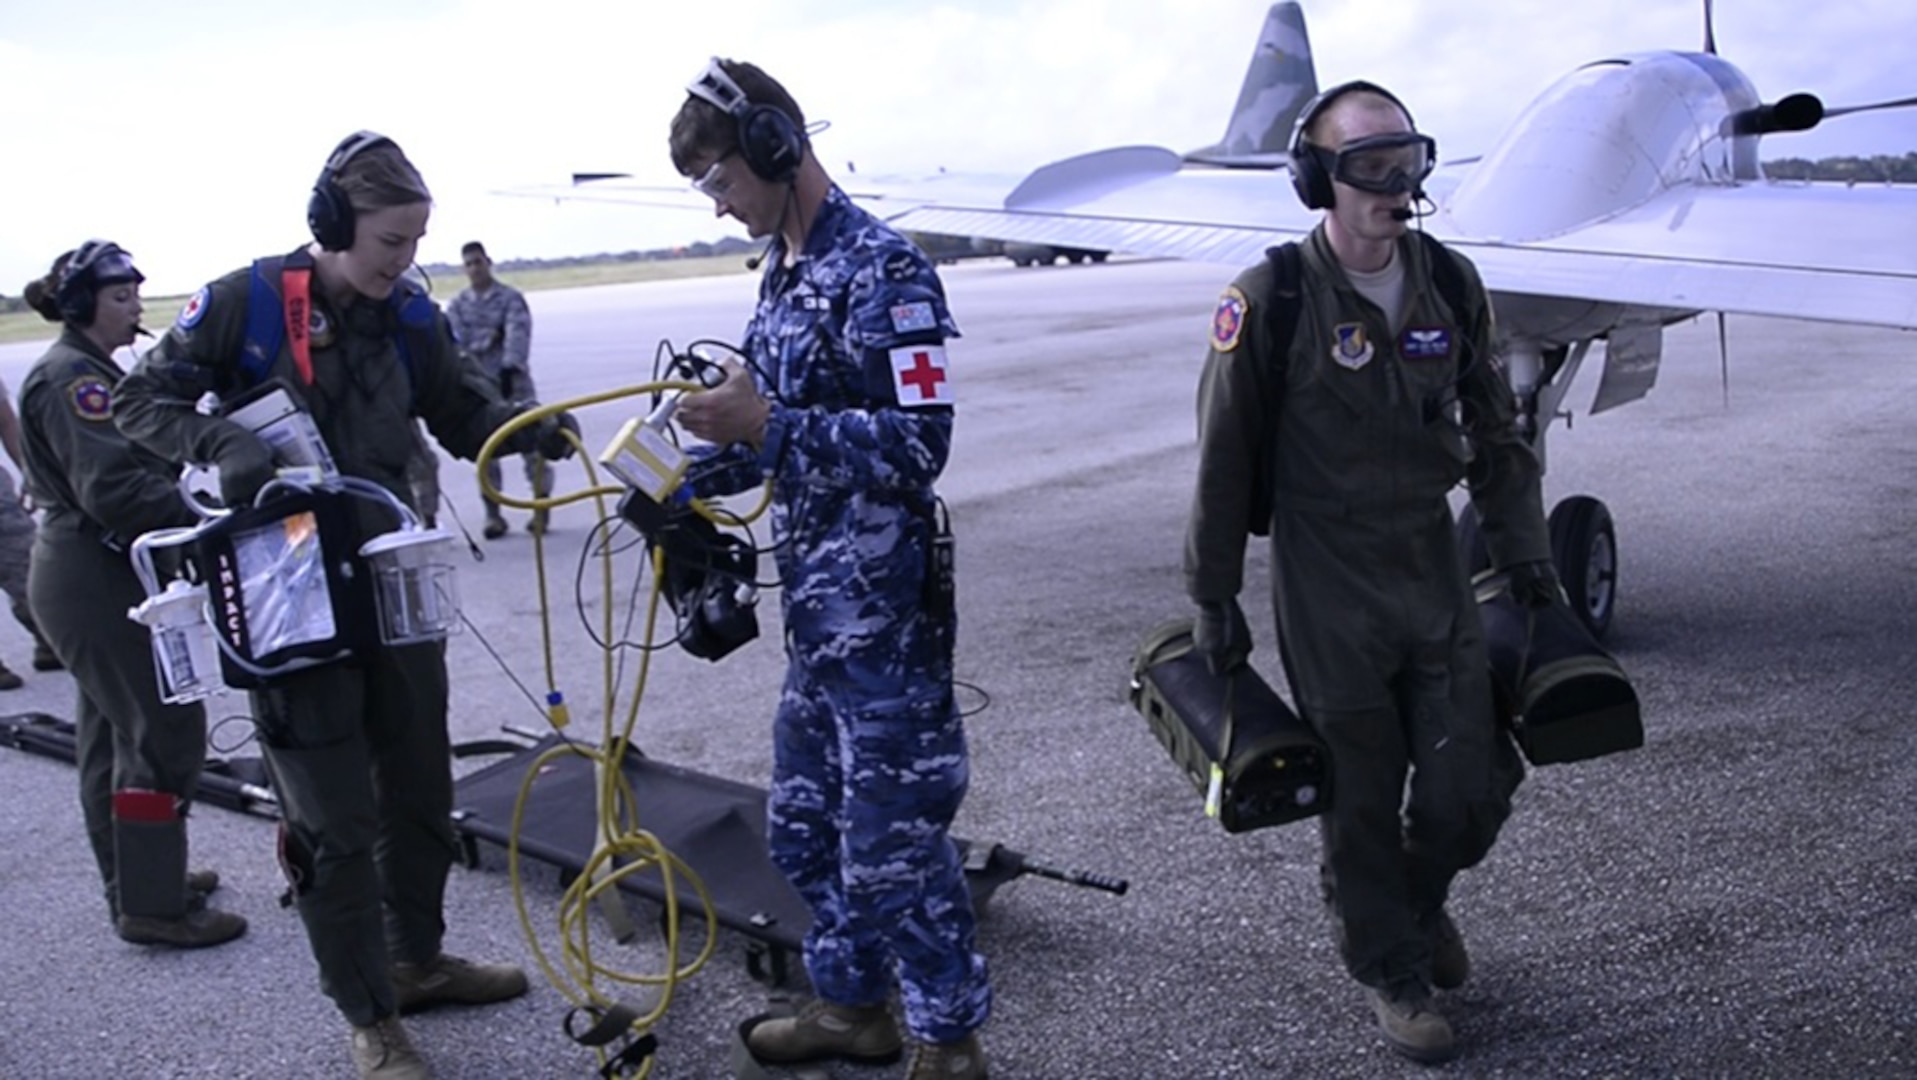 Aeromedical Evacuation Airmen from the U.S., Japanese and Australian air forces transport a simulated patient to a U.S. Air Force C-12 Huron as part of annual exercise Cope North Feb. 21, 2017, at Tinian Air Field. Aeromedical evacuation training was conducted on the Huron to familiarize airmen with patient care on a new airframe. Cope North is a long-standing exercise designed to enhance multilateral air operations between the partnered militaries, bringing together more than 2,700 U.S. Airmen, Sailors and Marines who are training alongside approximately 600 combined JASDF and RAAF participants. 